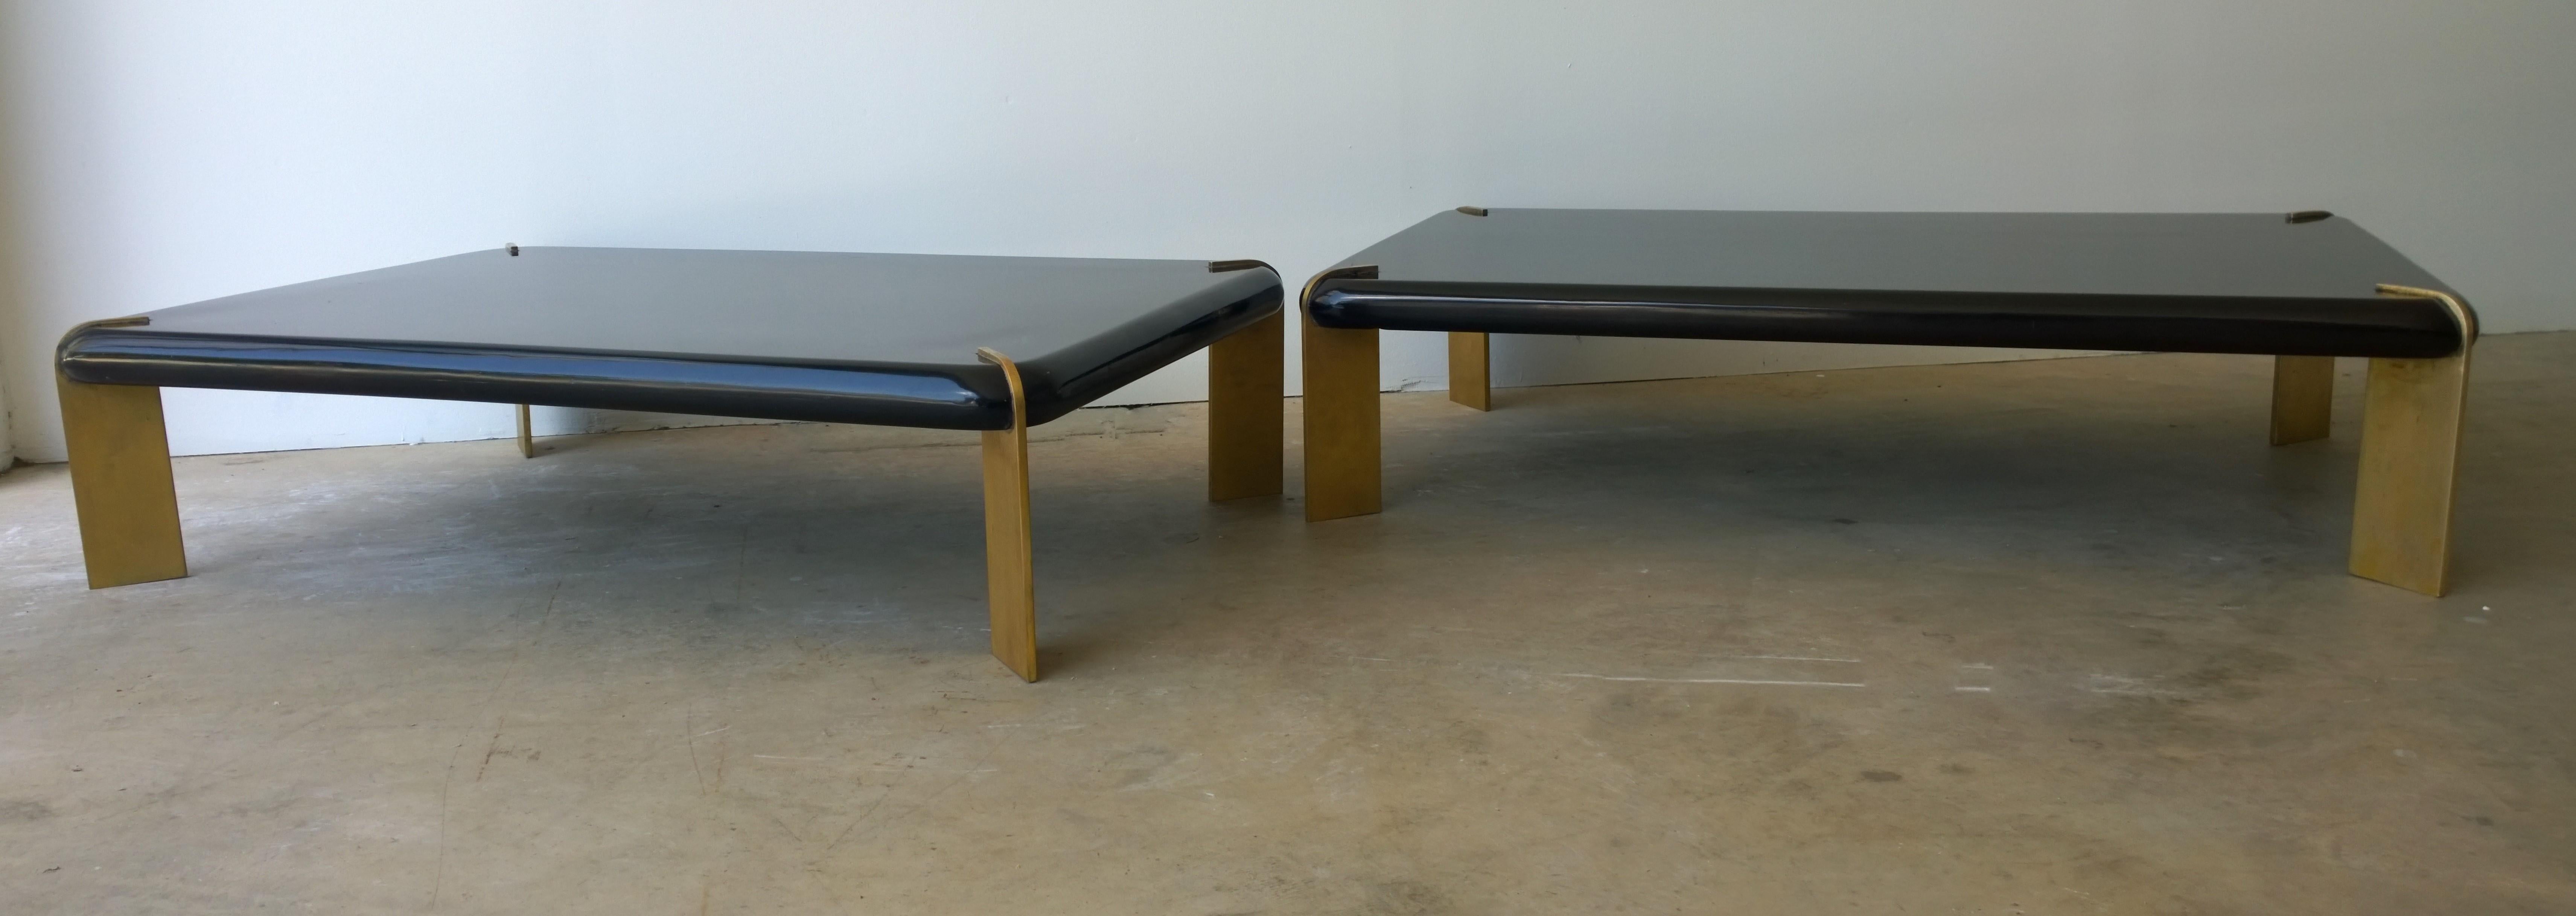 Offered are two Mid-Century Modern French coffee / cocktail tables lacquered in black with four substantial bronze legs. These unique coffee / cocktail tables are quite dramatic albeit with very clean lines and modern design. The substantial and